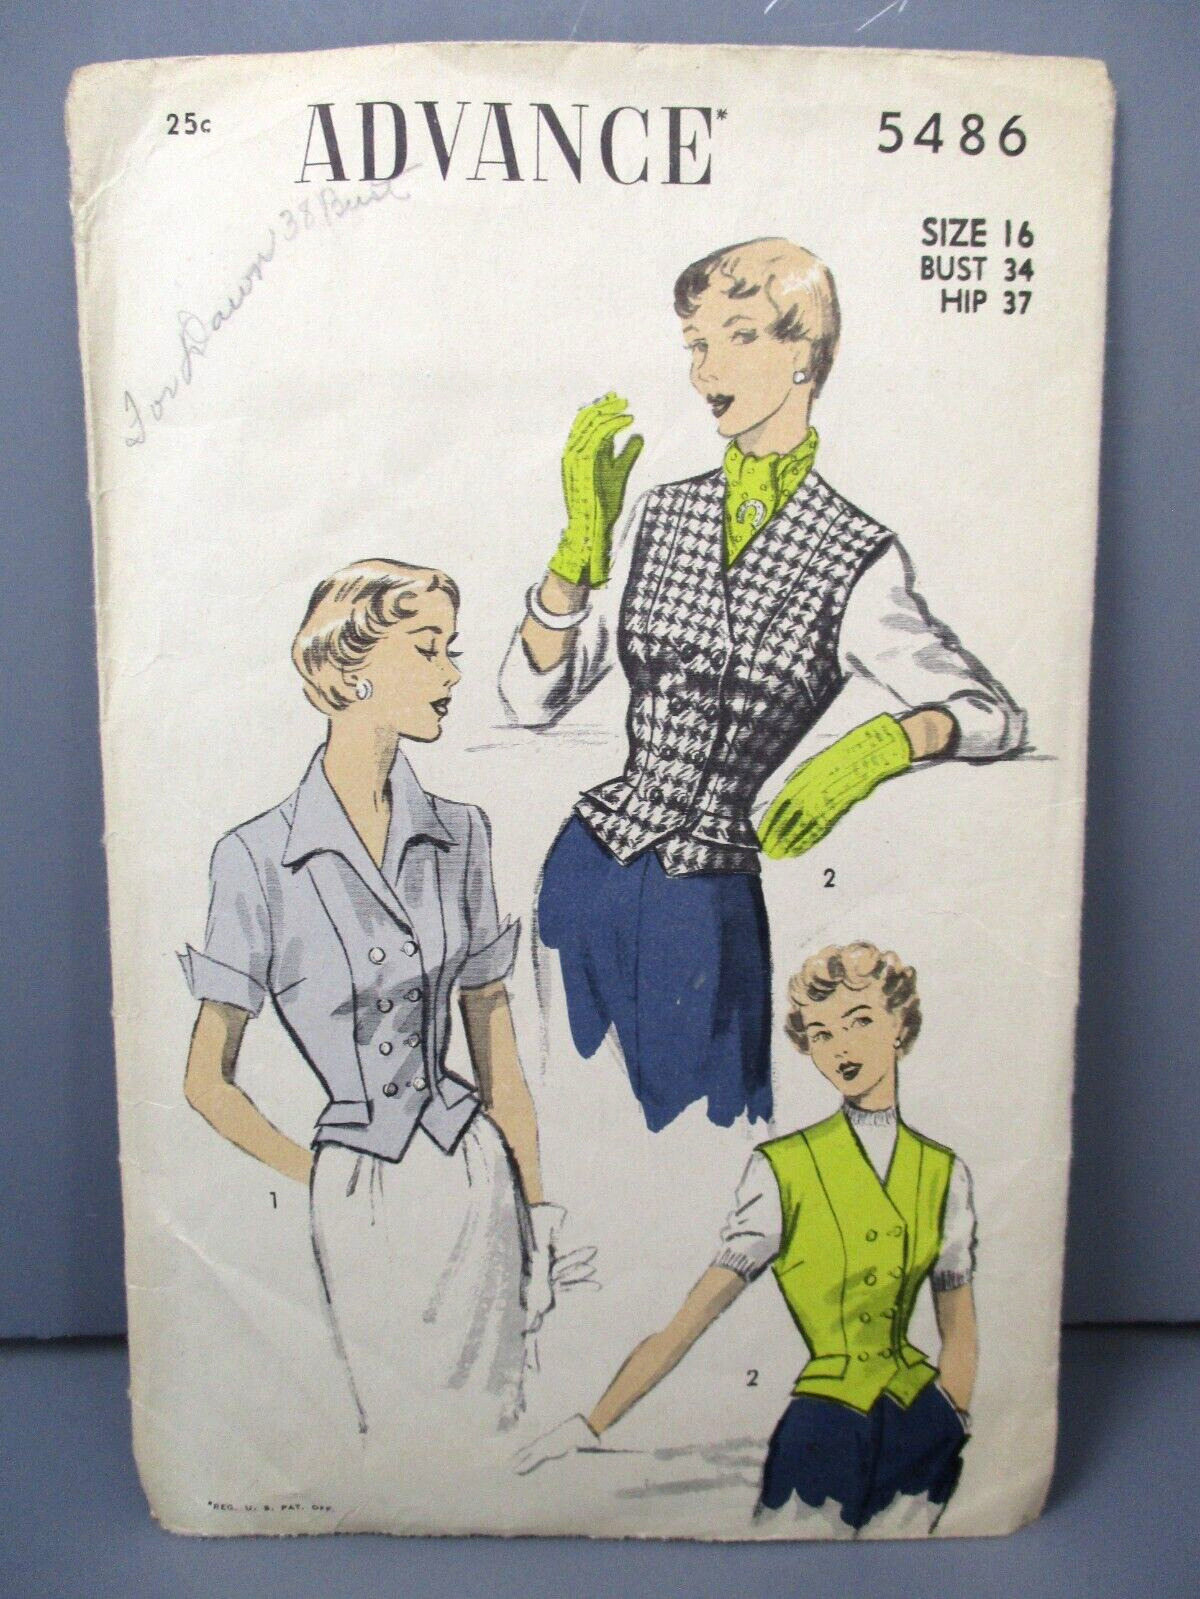 Vintage Advance Sewing Pattern 5486 Size 16 Bust 34 Hip 37 Womens Weskit Blouse